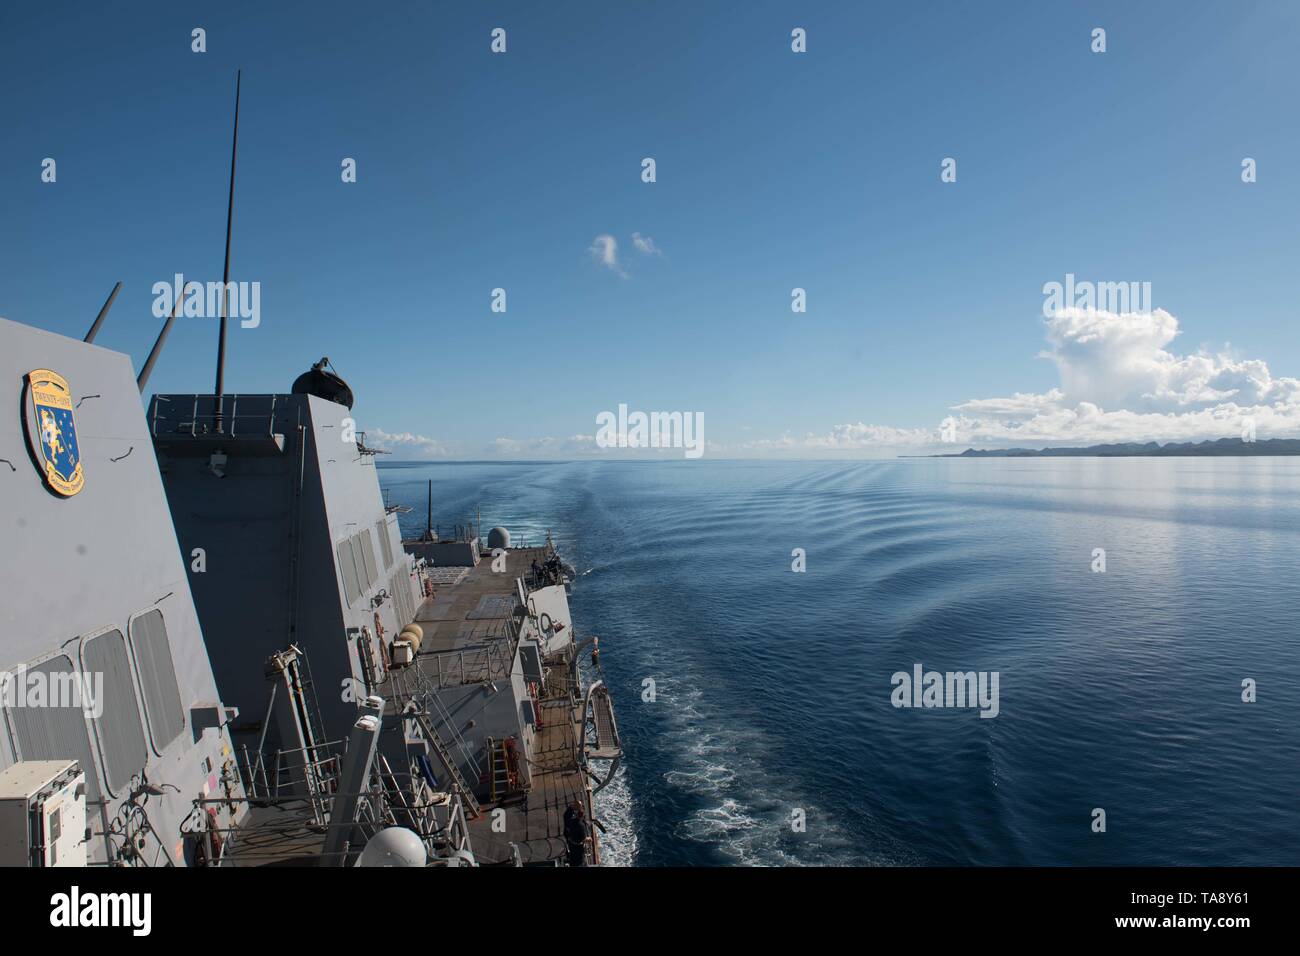 190515-N-OW019-1014 PALAU (May 15, 2019) The guided-missile destroyer USS Chung-Hoon (DDG 93) sails towards Palau to conduct a port visit. Chung-Hoon is deployed to the U.S. 7th Fleet area of operations in support of security and stability in the Indo-Pacific region. (U.S. Navy photo by Mass Communication Specialist 2nd Class Logan C. Kellums) Stock Photo